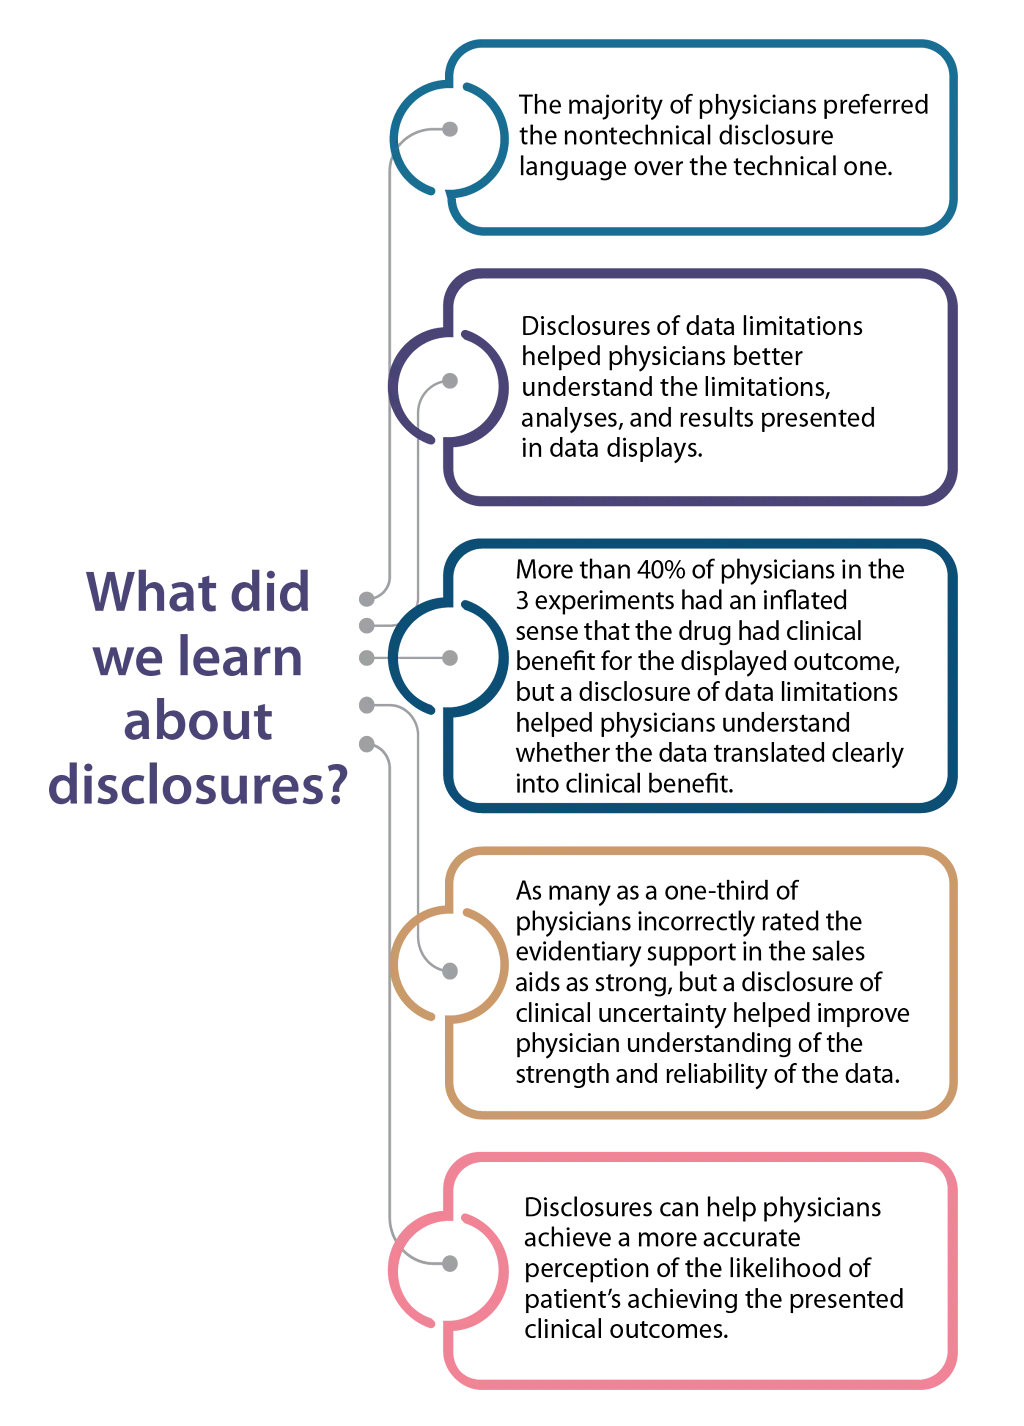 Five results learned from disclosures